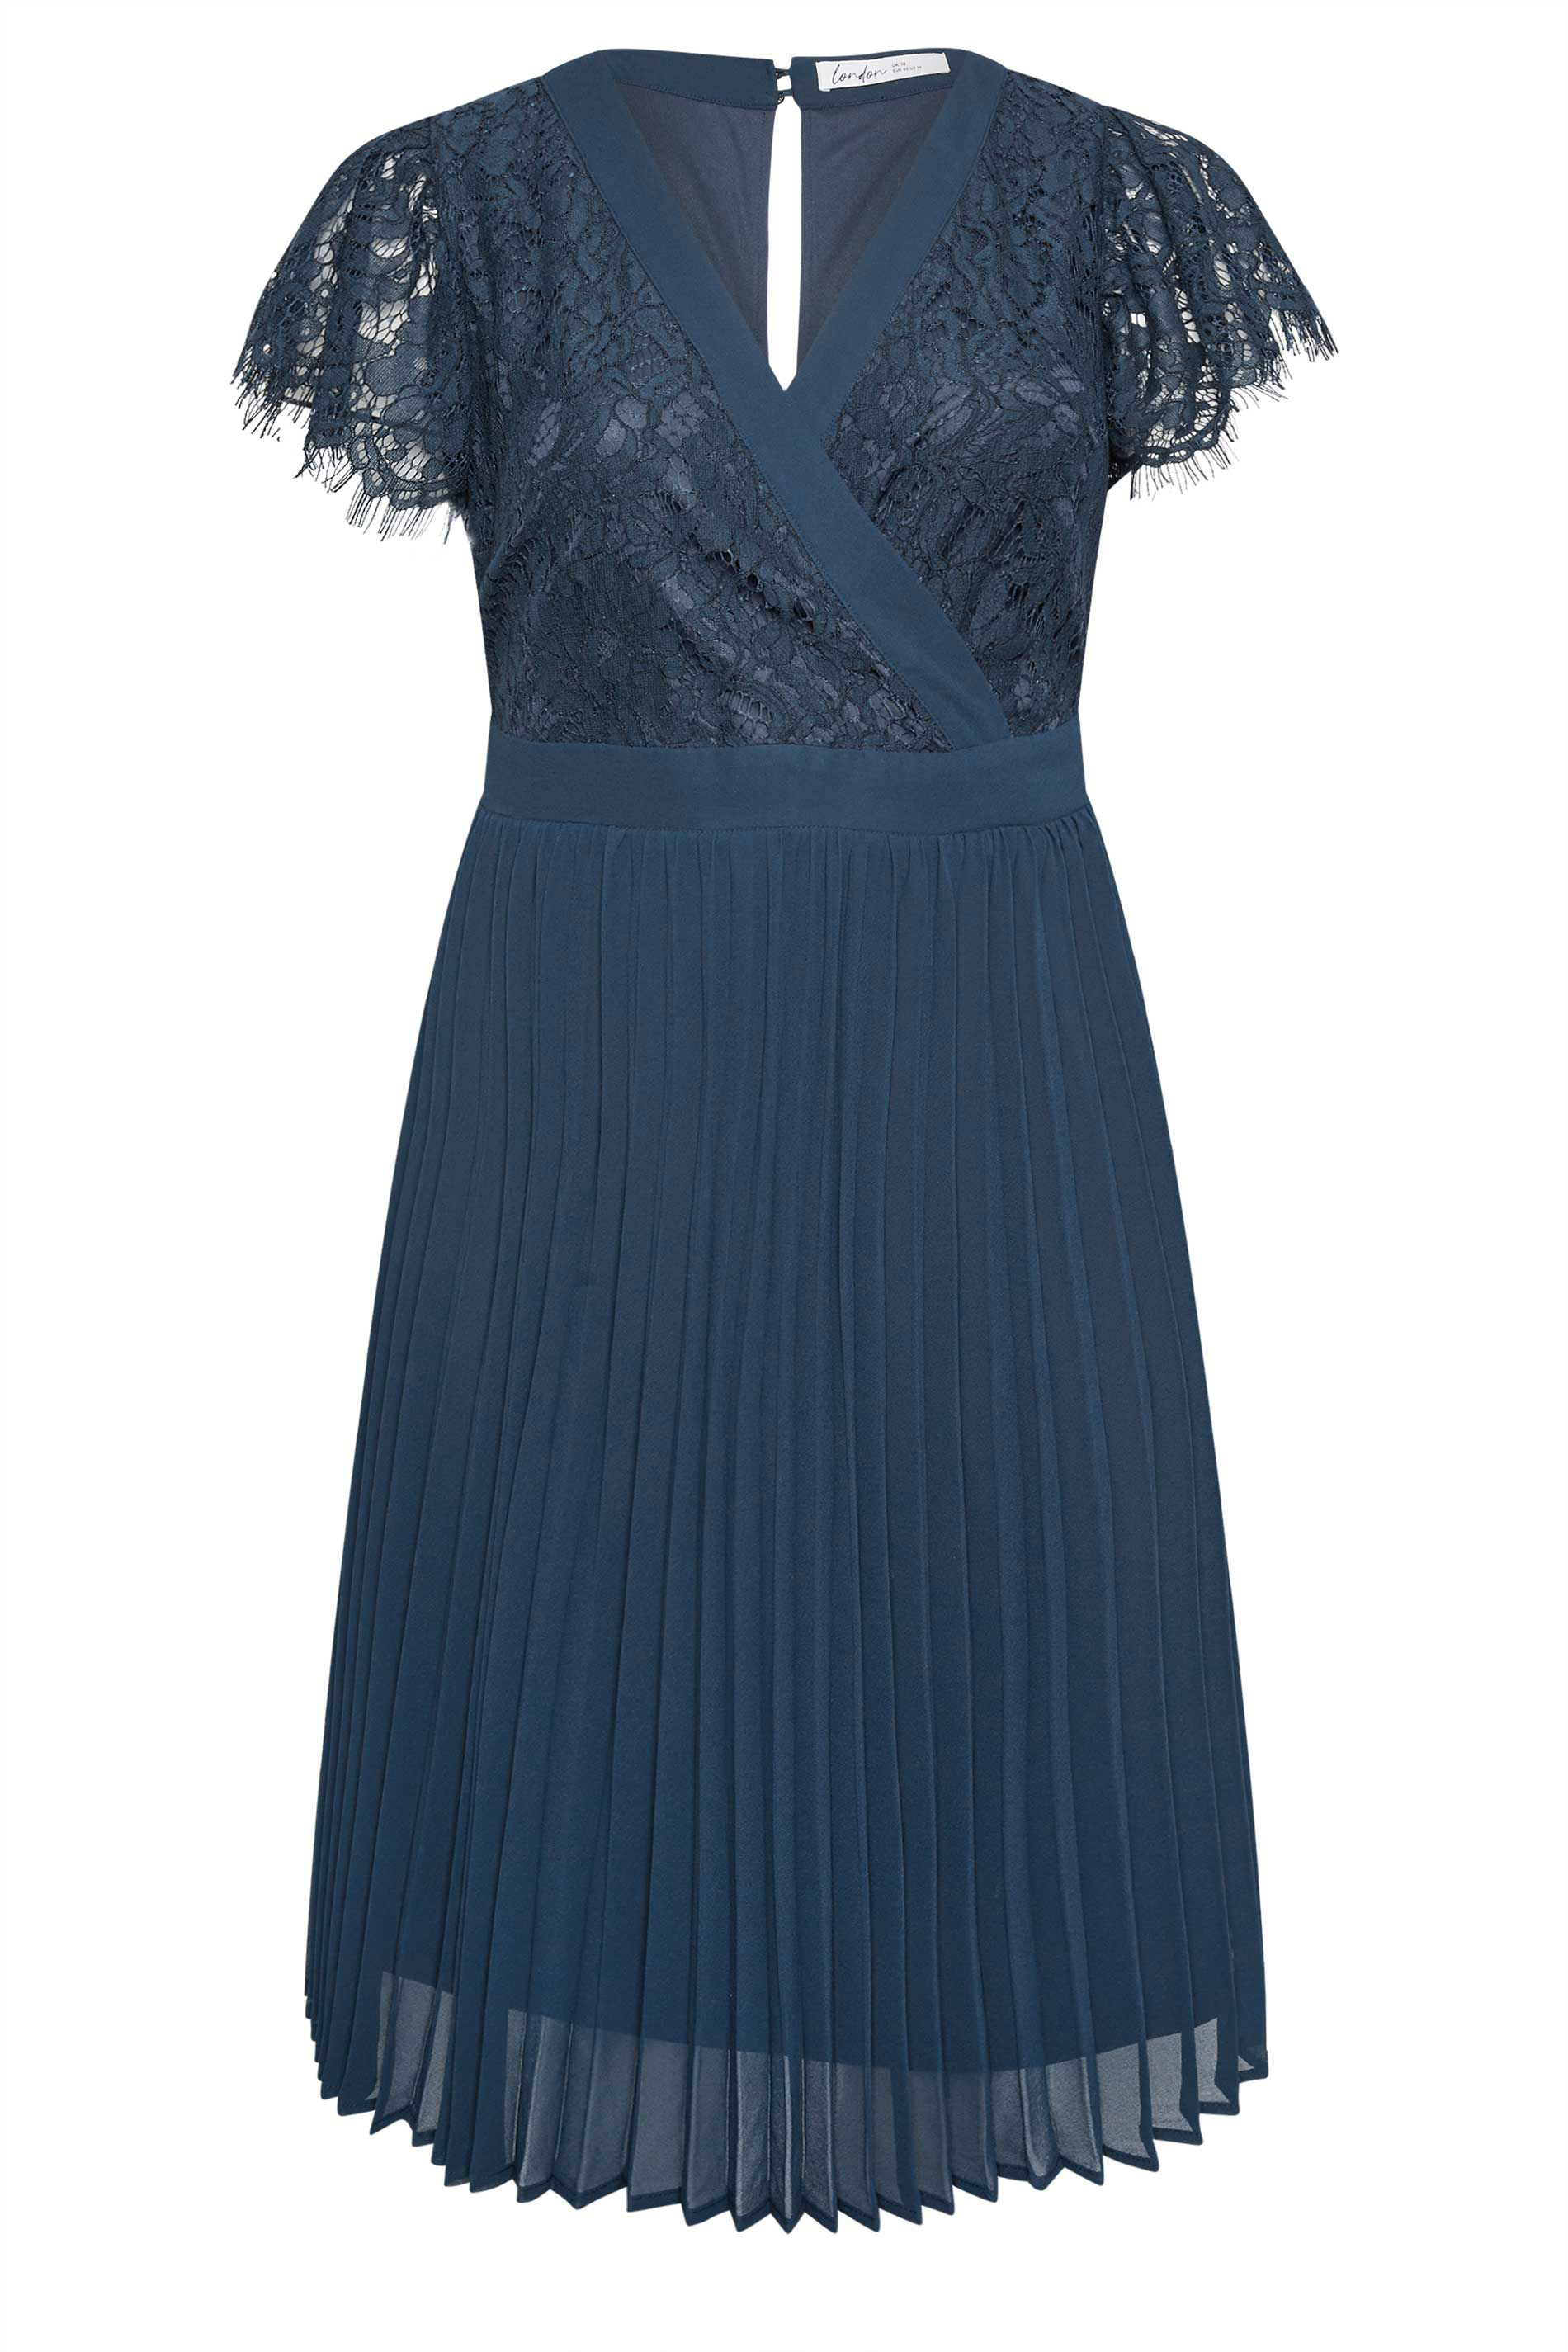 YOURS LONDON Plus Size Navy Blue Lace Wrap Midi Dress | Yours Clothing 2